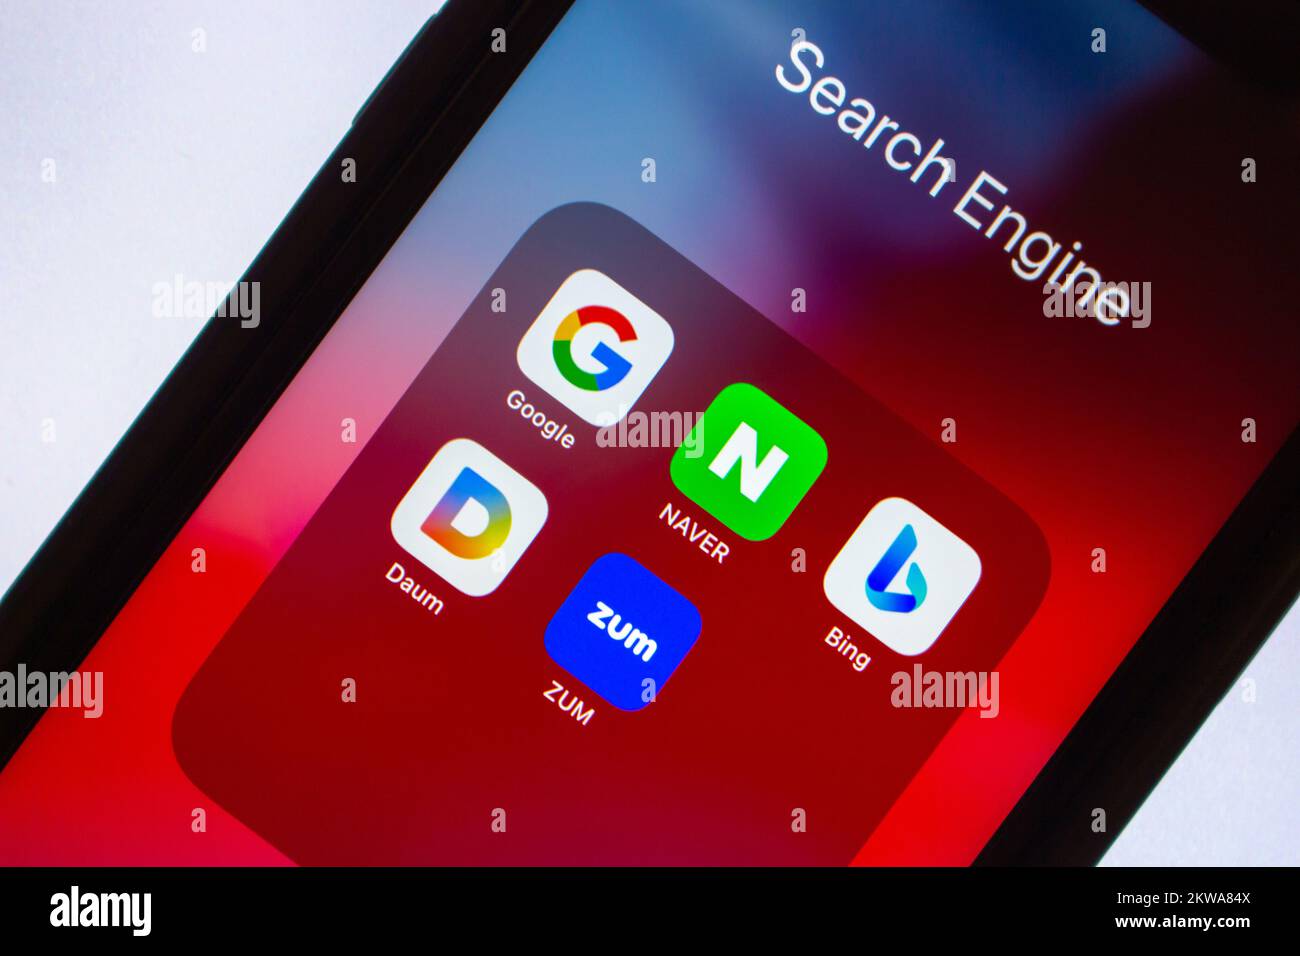 Vancouver, CANADA - Nov 7 2022 : South Korea’s popular internet search engine and web portal icons (Google, Naver, Bing, Daum and Zum) on an iPhone. Stock Photo